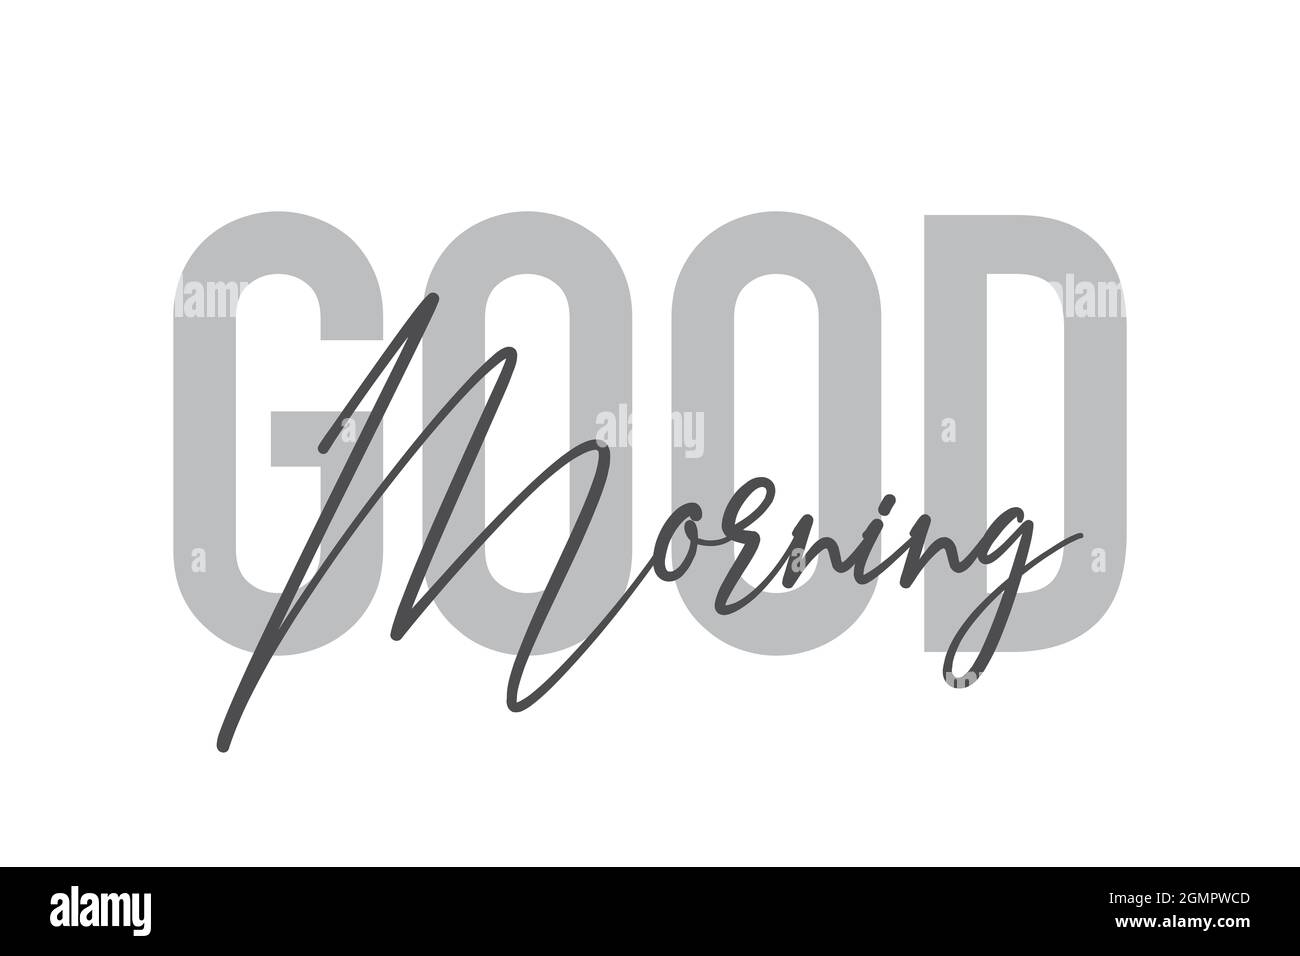 Modern, simple, minimal typographic design of a saying 'Good Morning' in tones of grey color. Cool, urban, trendy and playful graphic vector art with Stock Photo